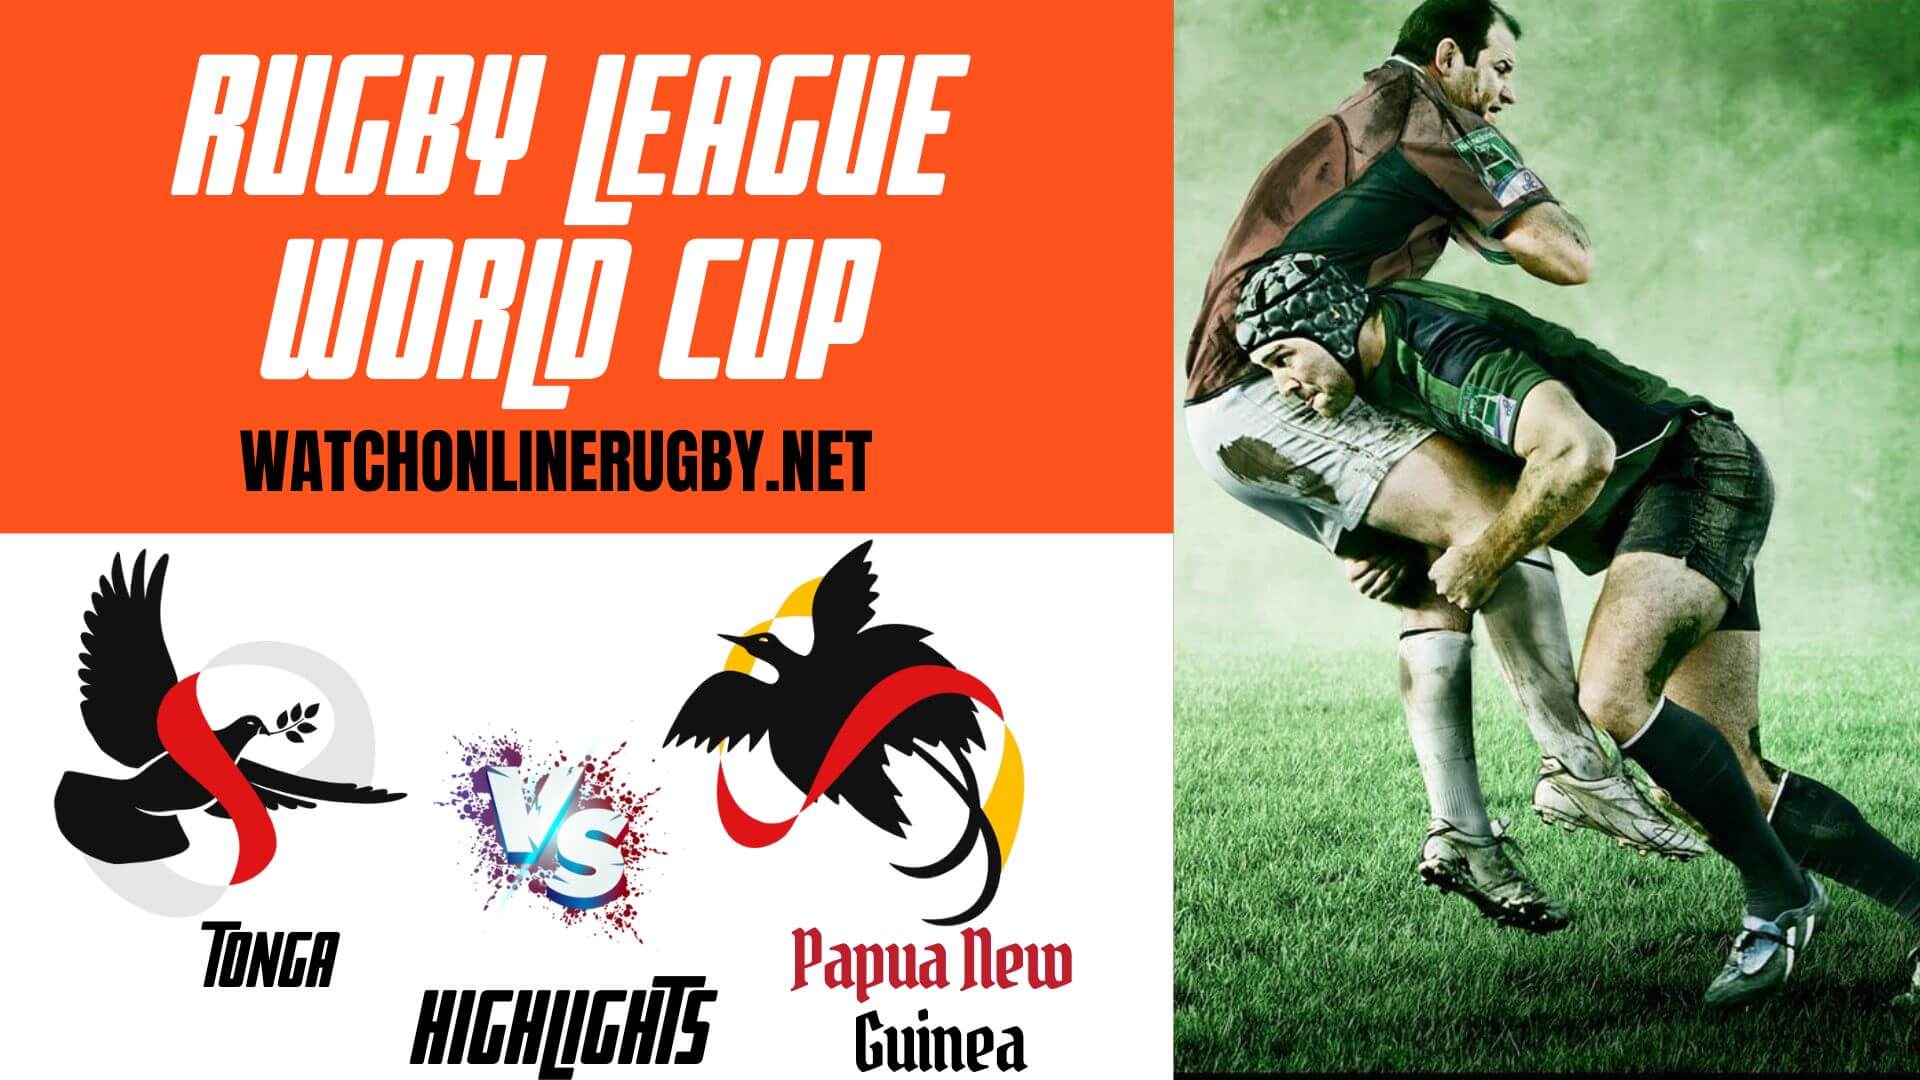 Tonga Vs Papua New Guinea Rugby League World Cup 2022 RD 1